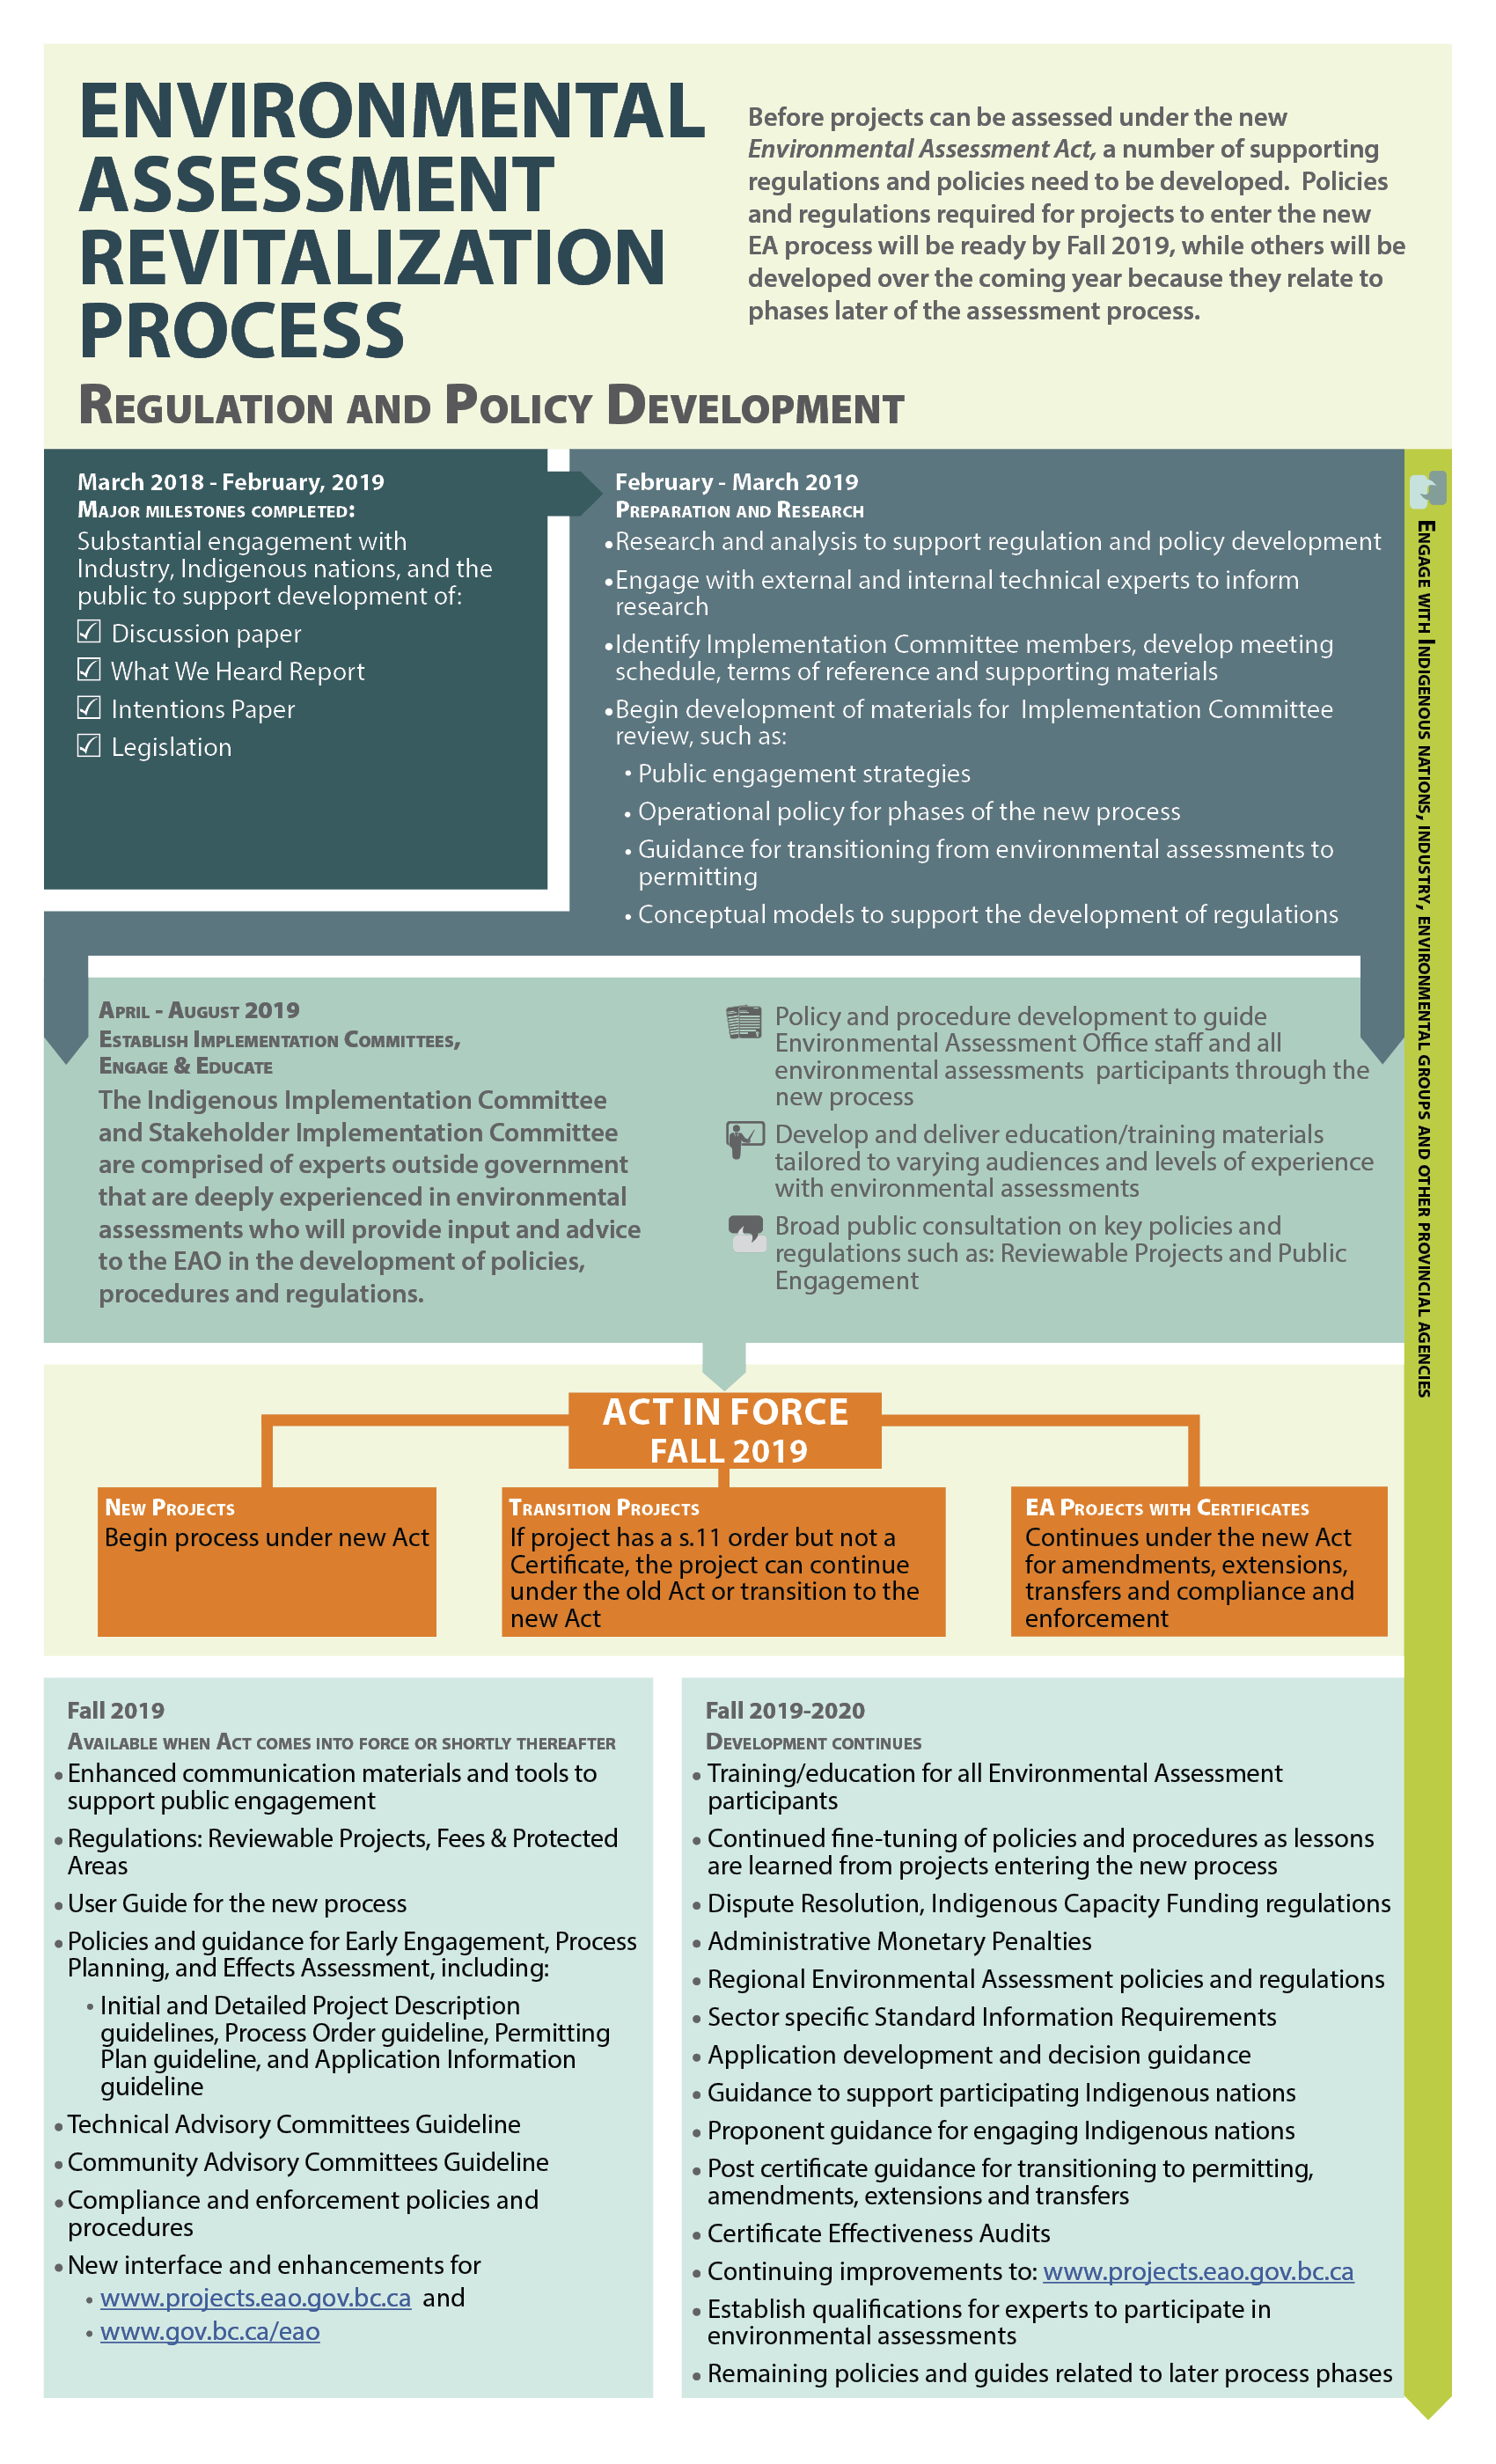 Flow chart showing steps to revitalize environmental assessment policies and regulations